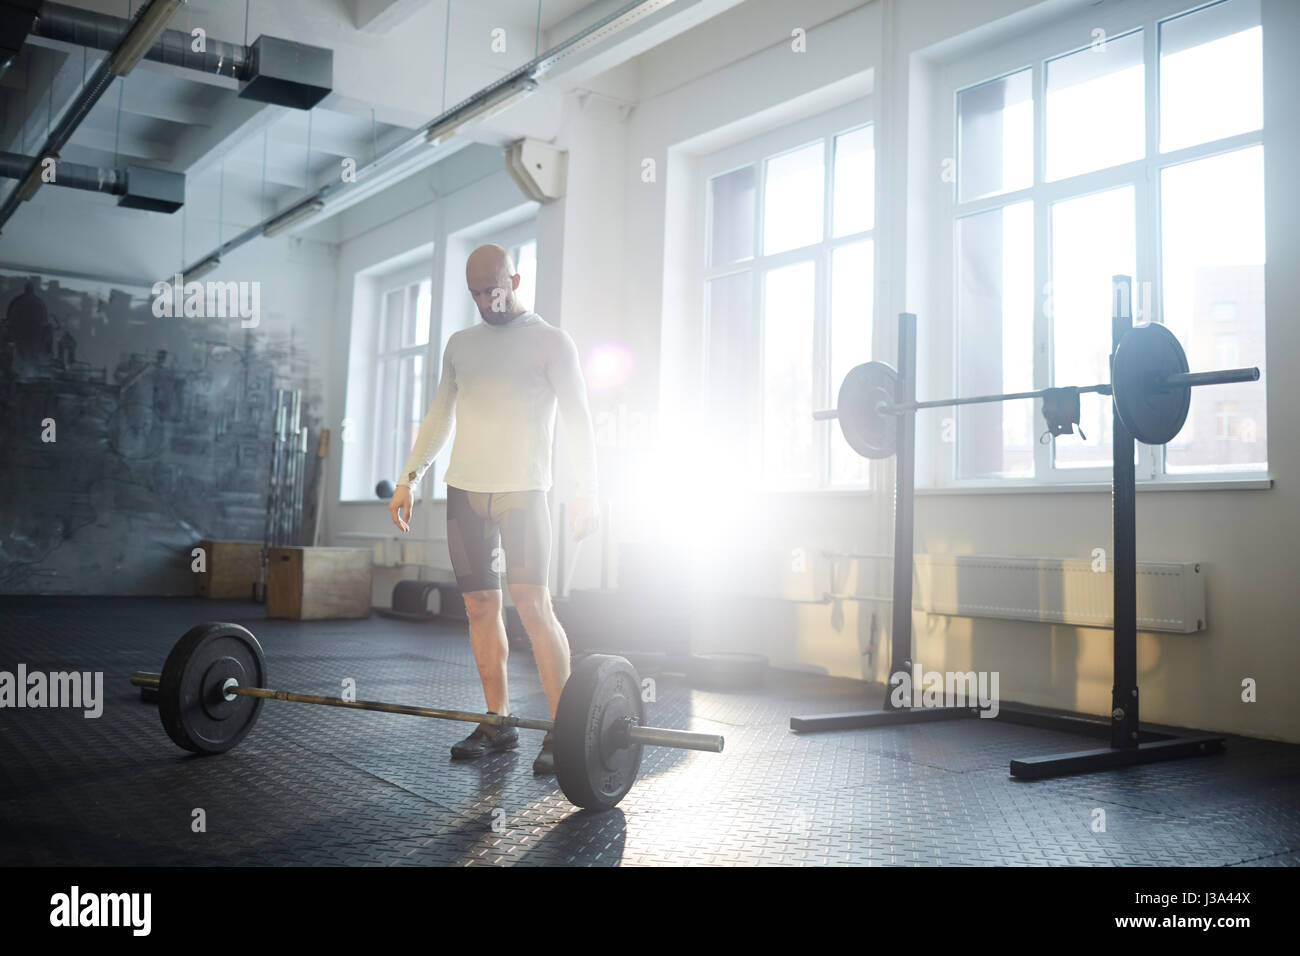 Man in Weightlifting Workout Stock Photo